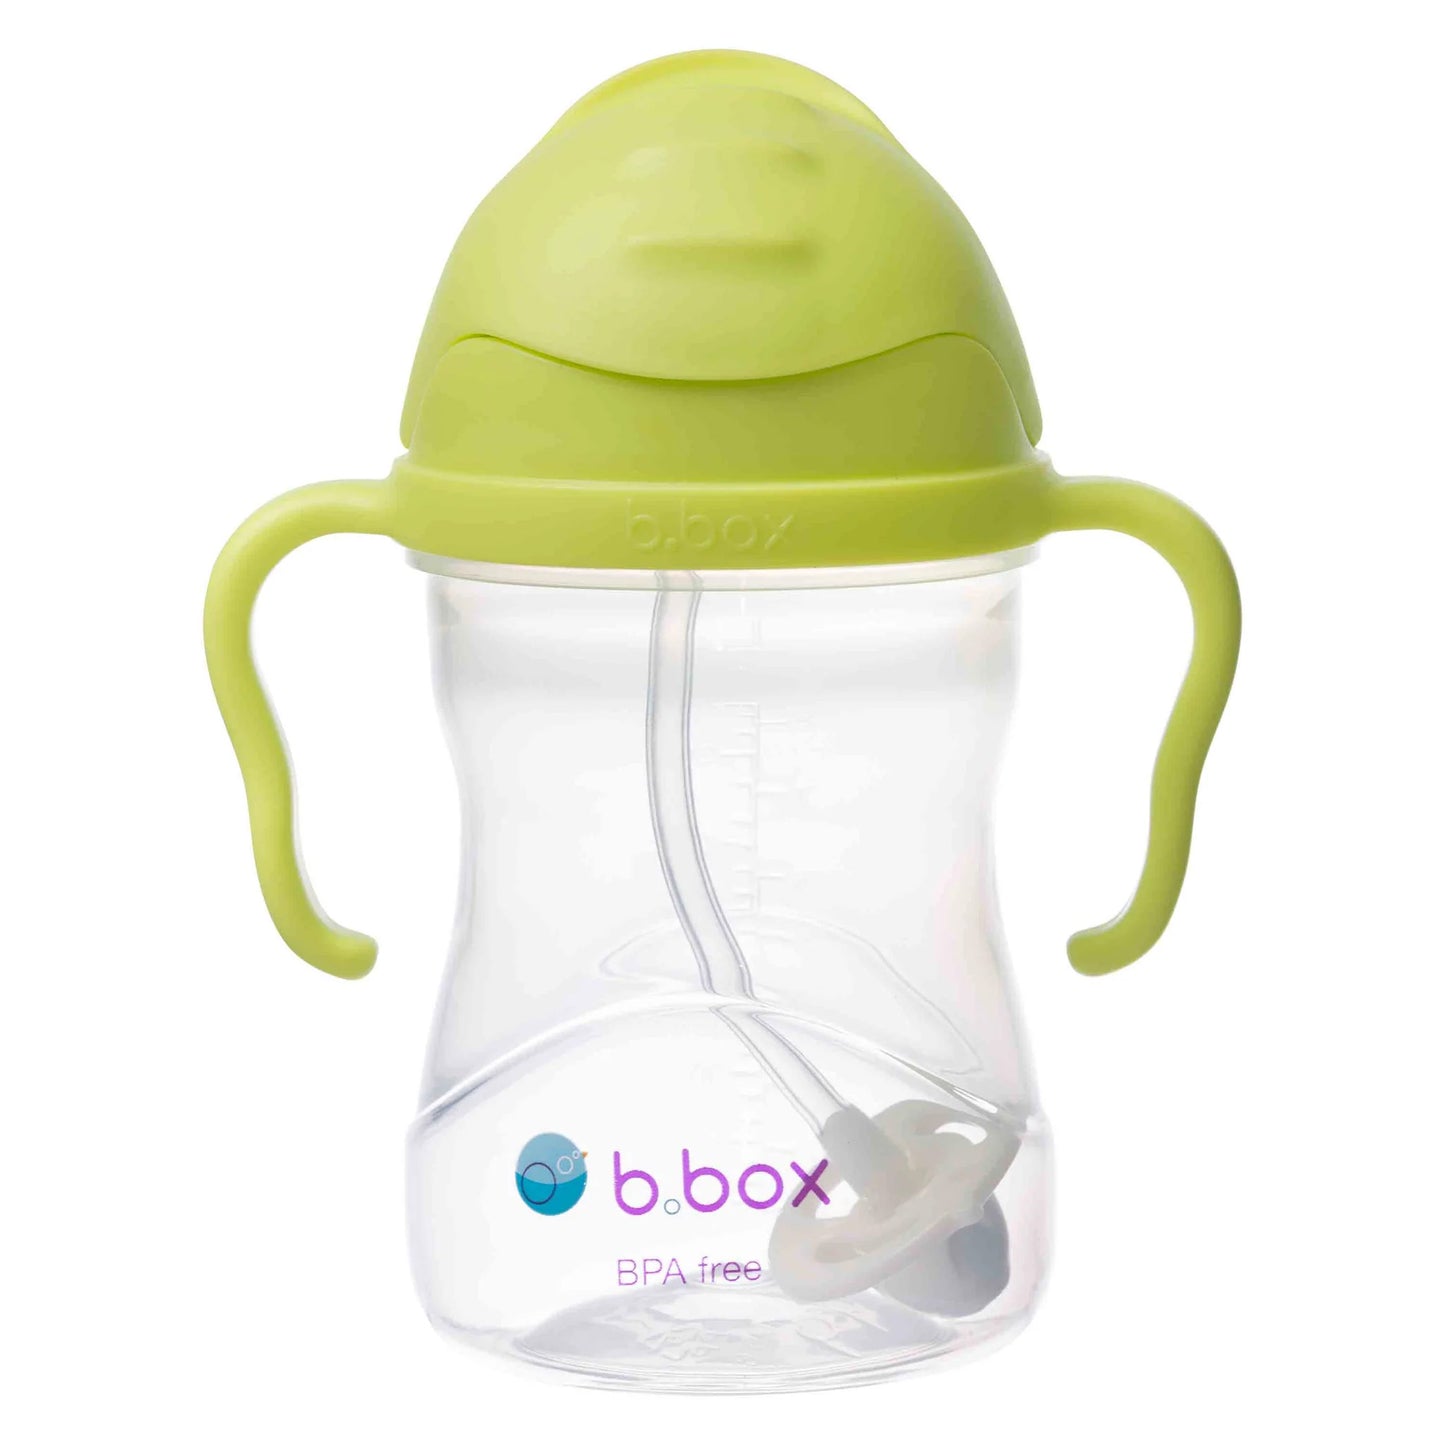 b.box Sippy Cup (Pineapple)